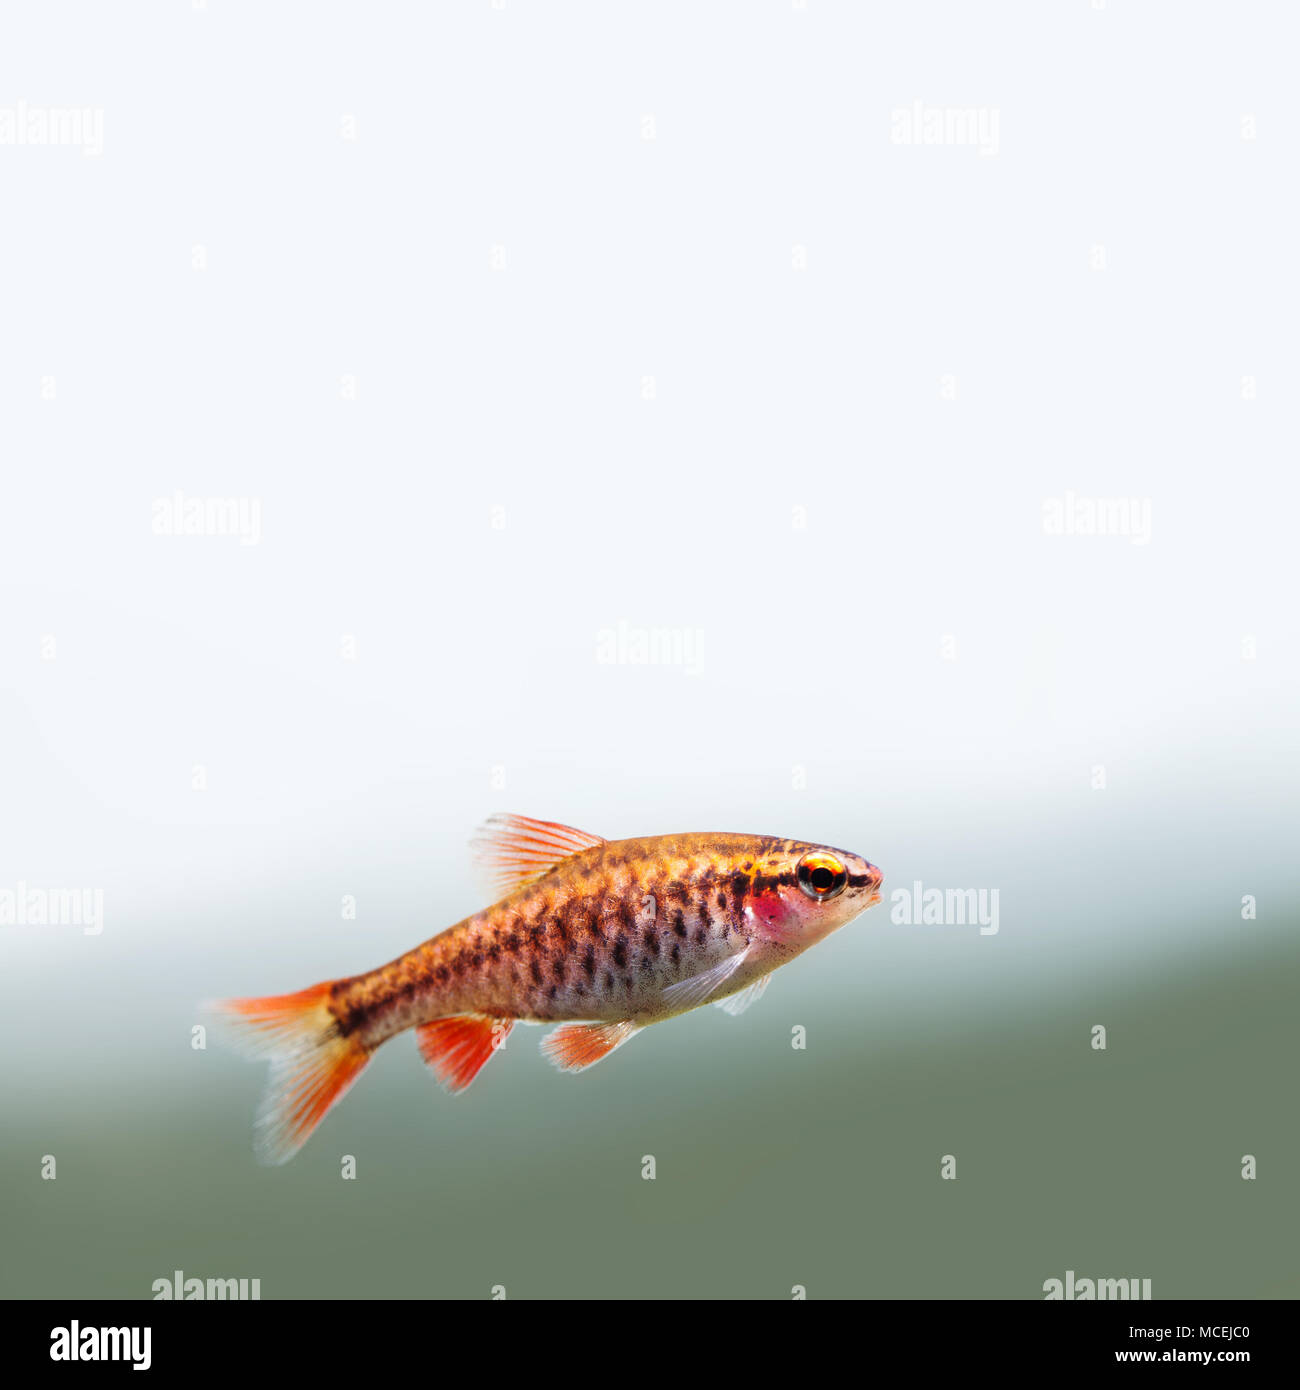 Fishtank landscape with red orange fish cherry Barb. Tropical freshwater aquarium with female Puntius titteya pet belonging to the family Cyprinidae. Copy space. Stock Photo